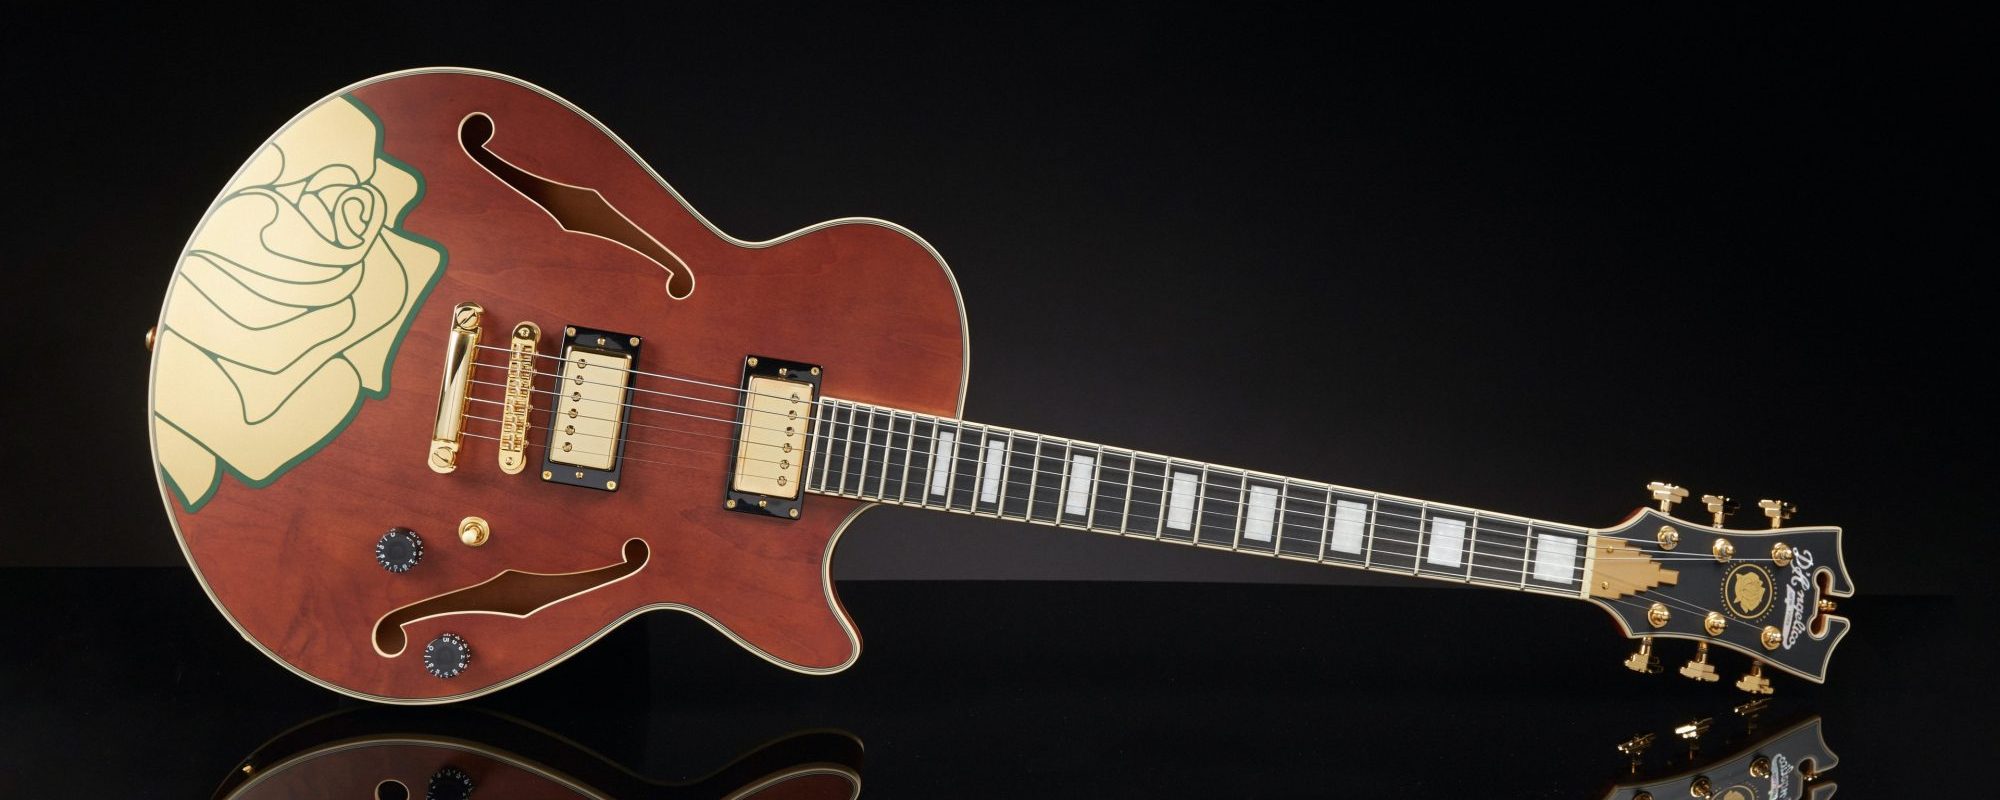 This Special Edition Premier Grateful Dead SS From D’Angelico Guitars Celebrates The 50th Anniversary of ‘American Beauty’ Album